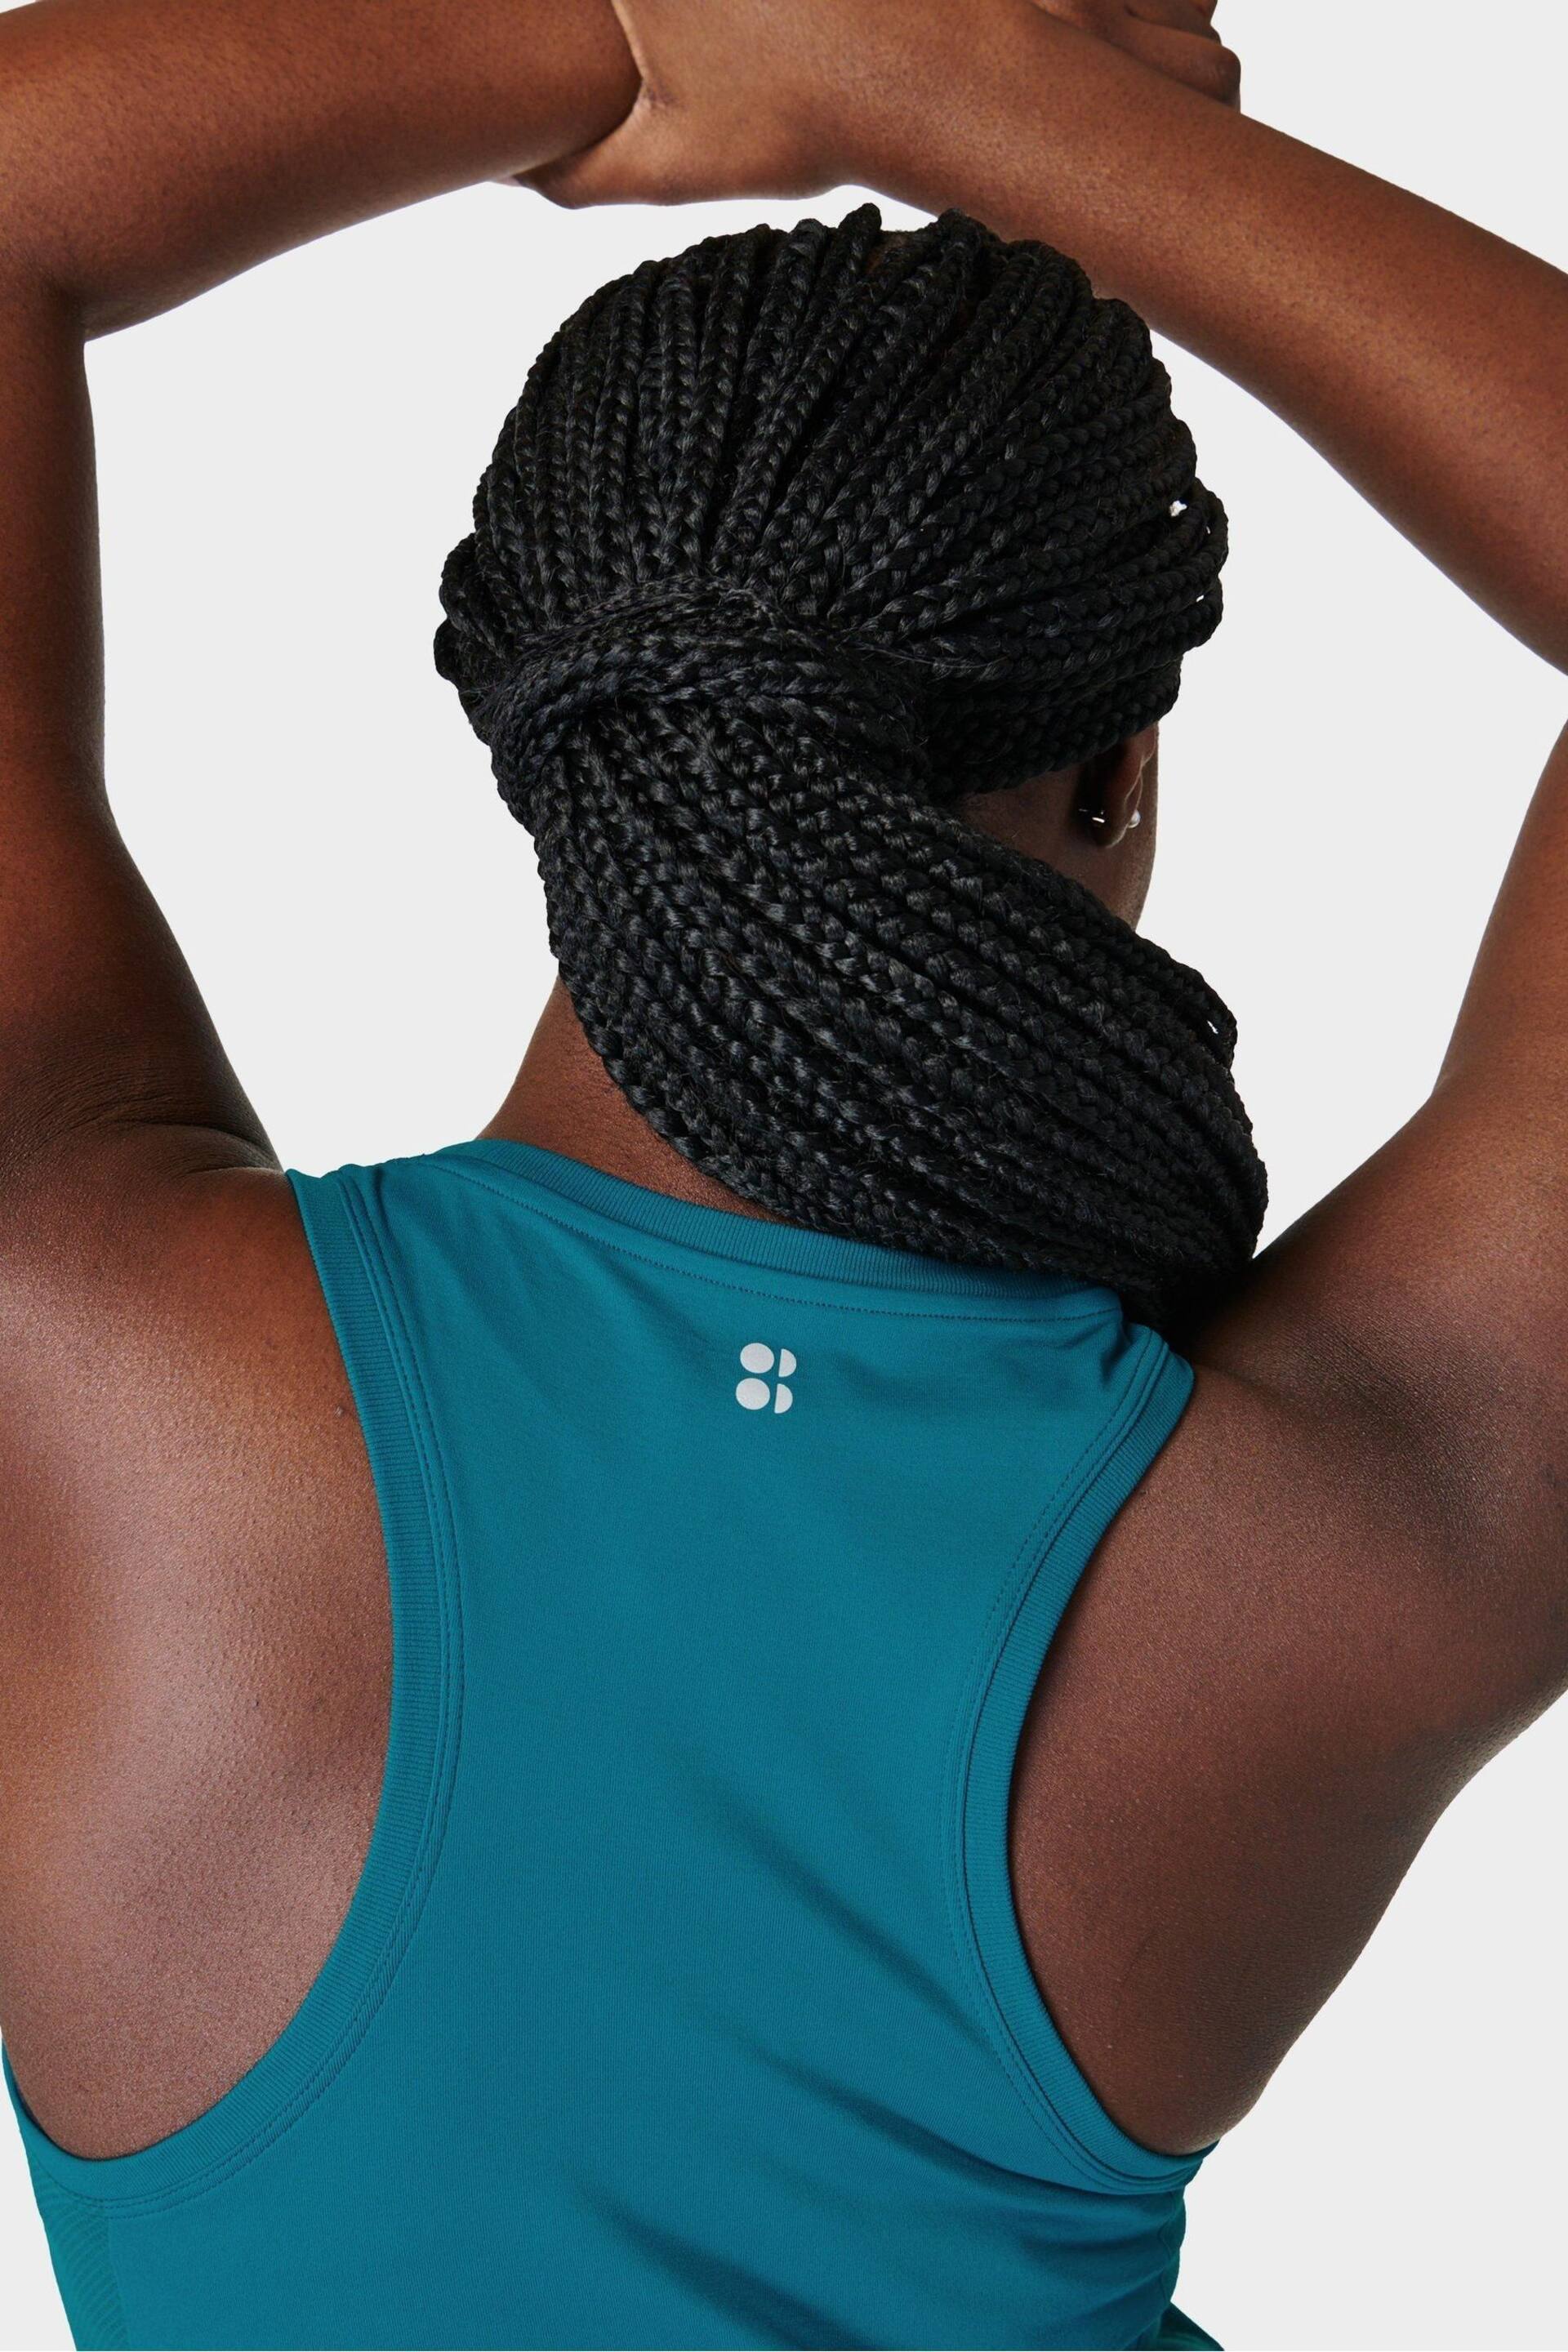 Sweaty Betty Reef Teal Blue Athlete Seamless Workout Tank Top - Image 6 of 7